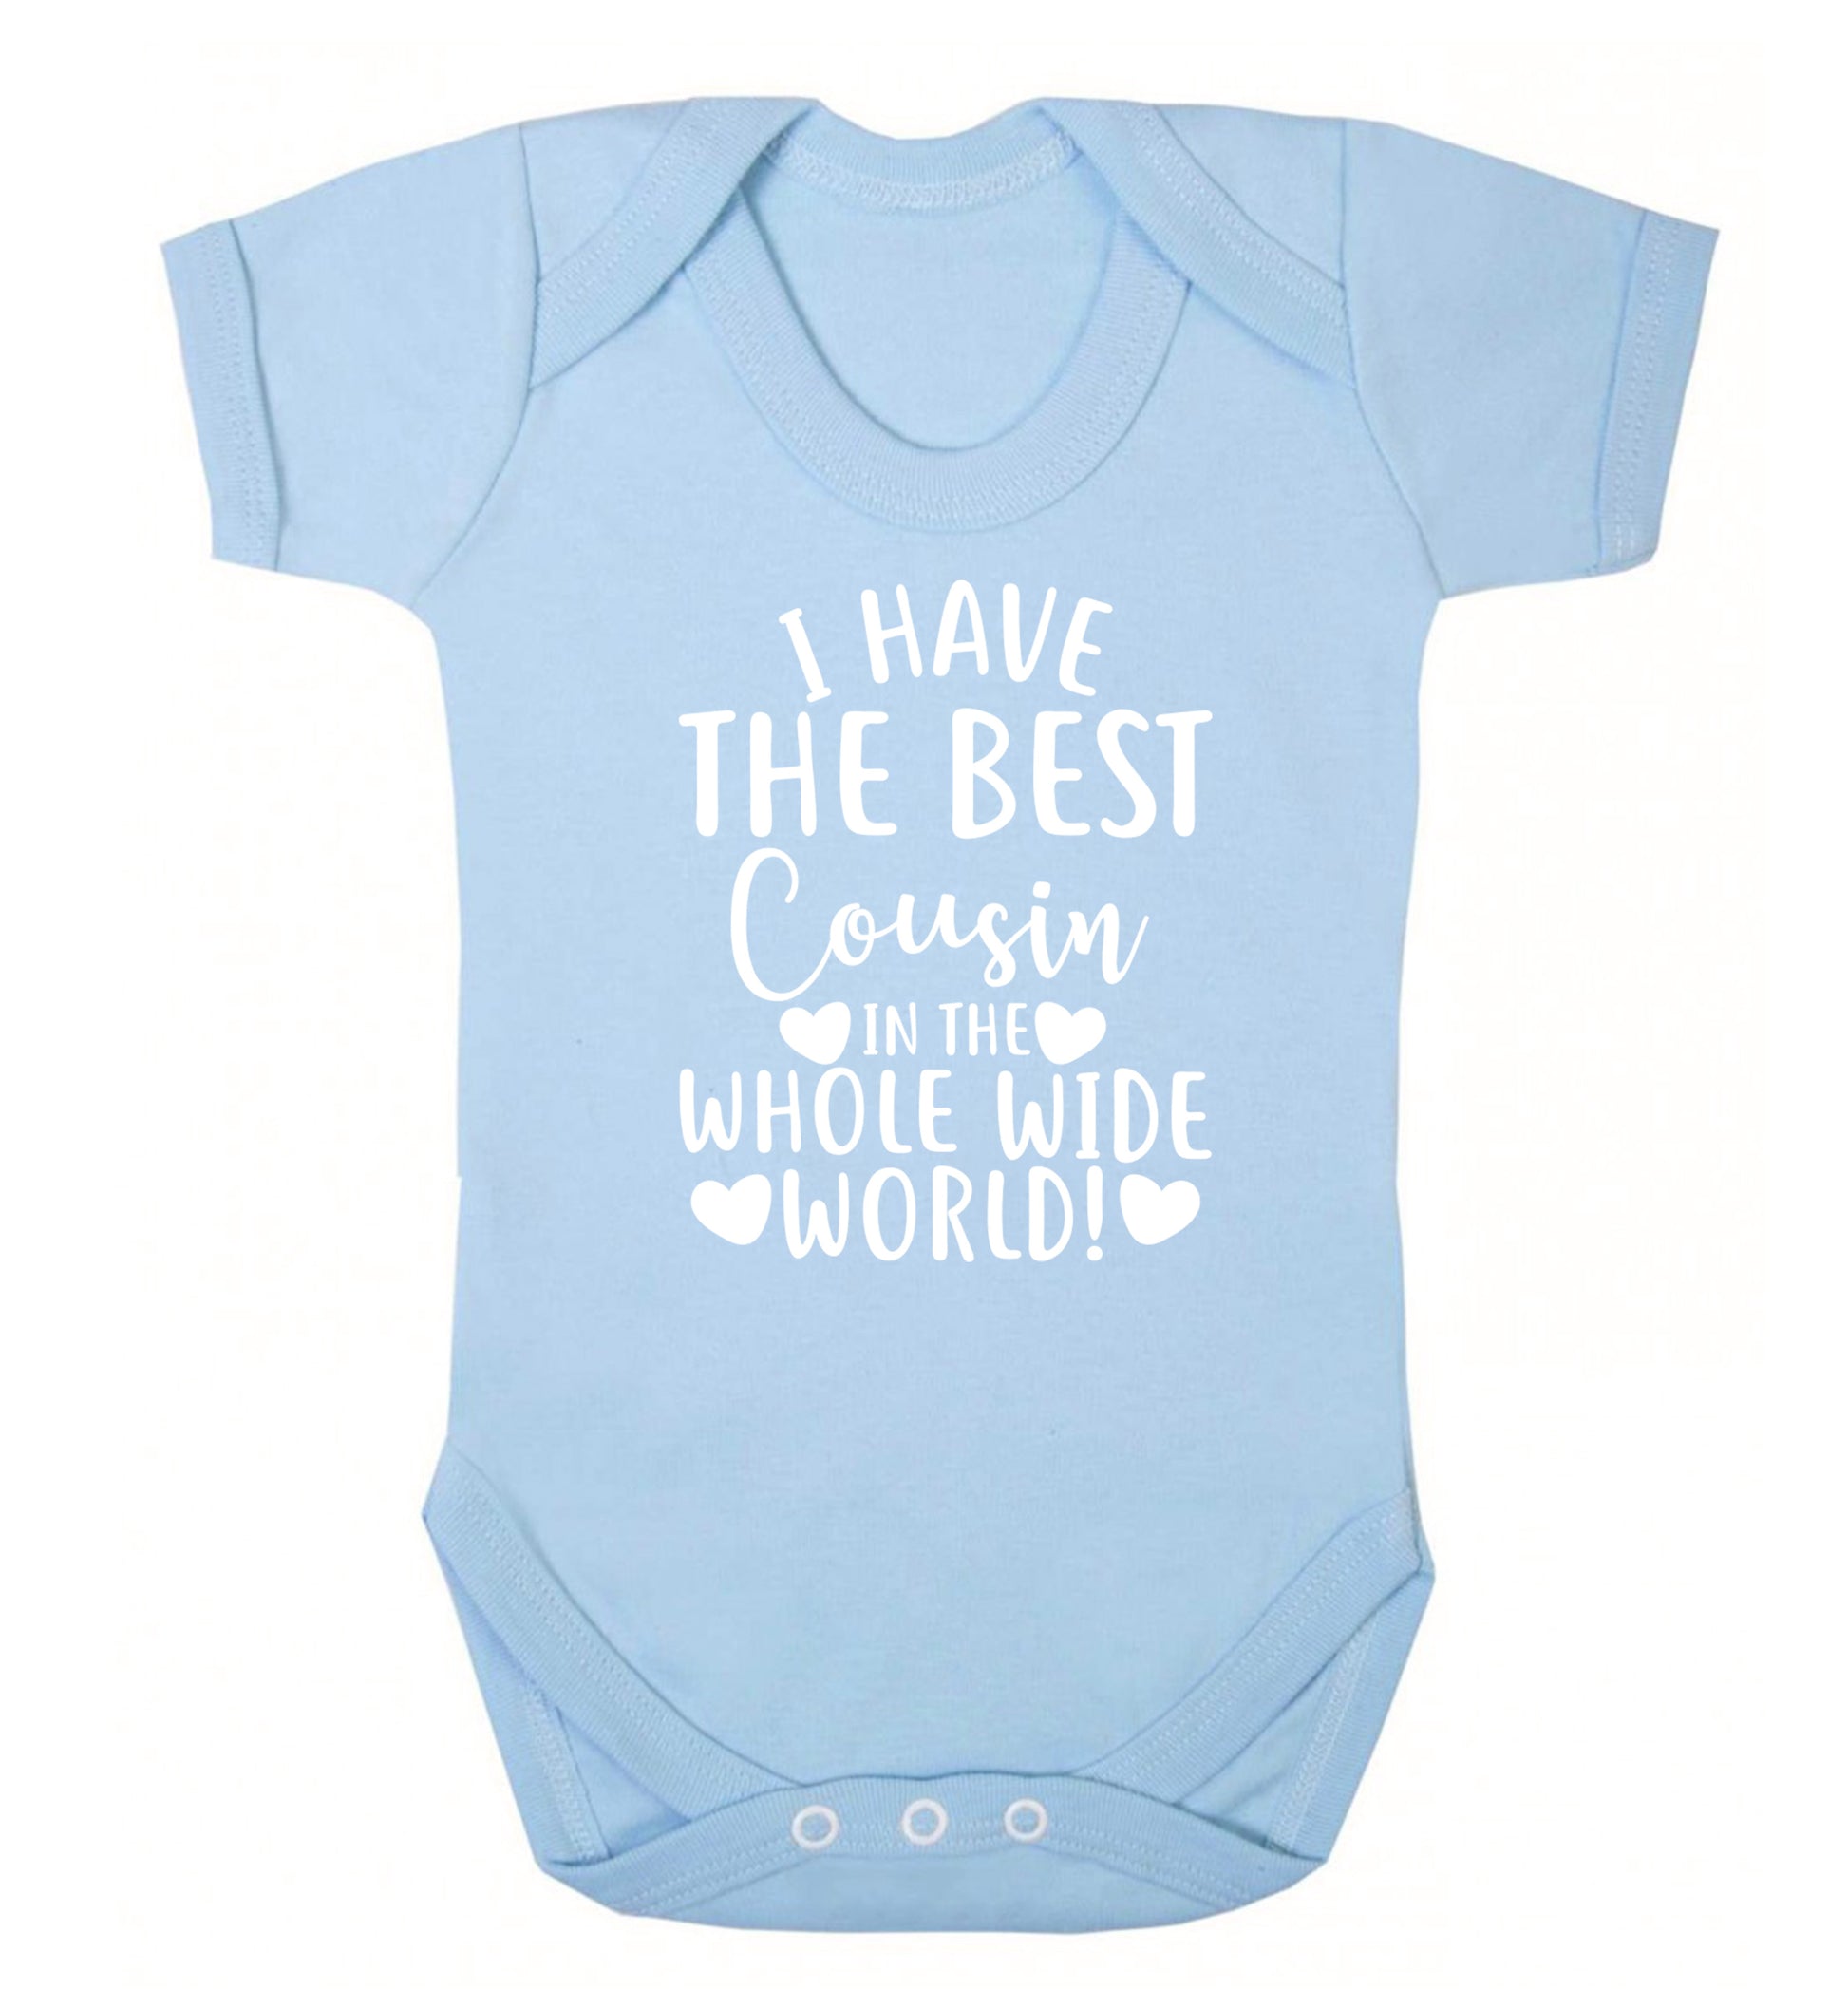 I have the best cousin in the whole wide world! Baby Vest pale blue 18-24 months